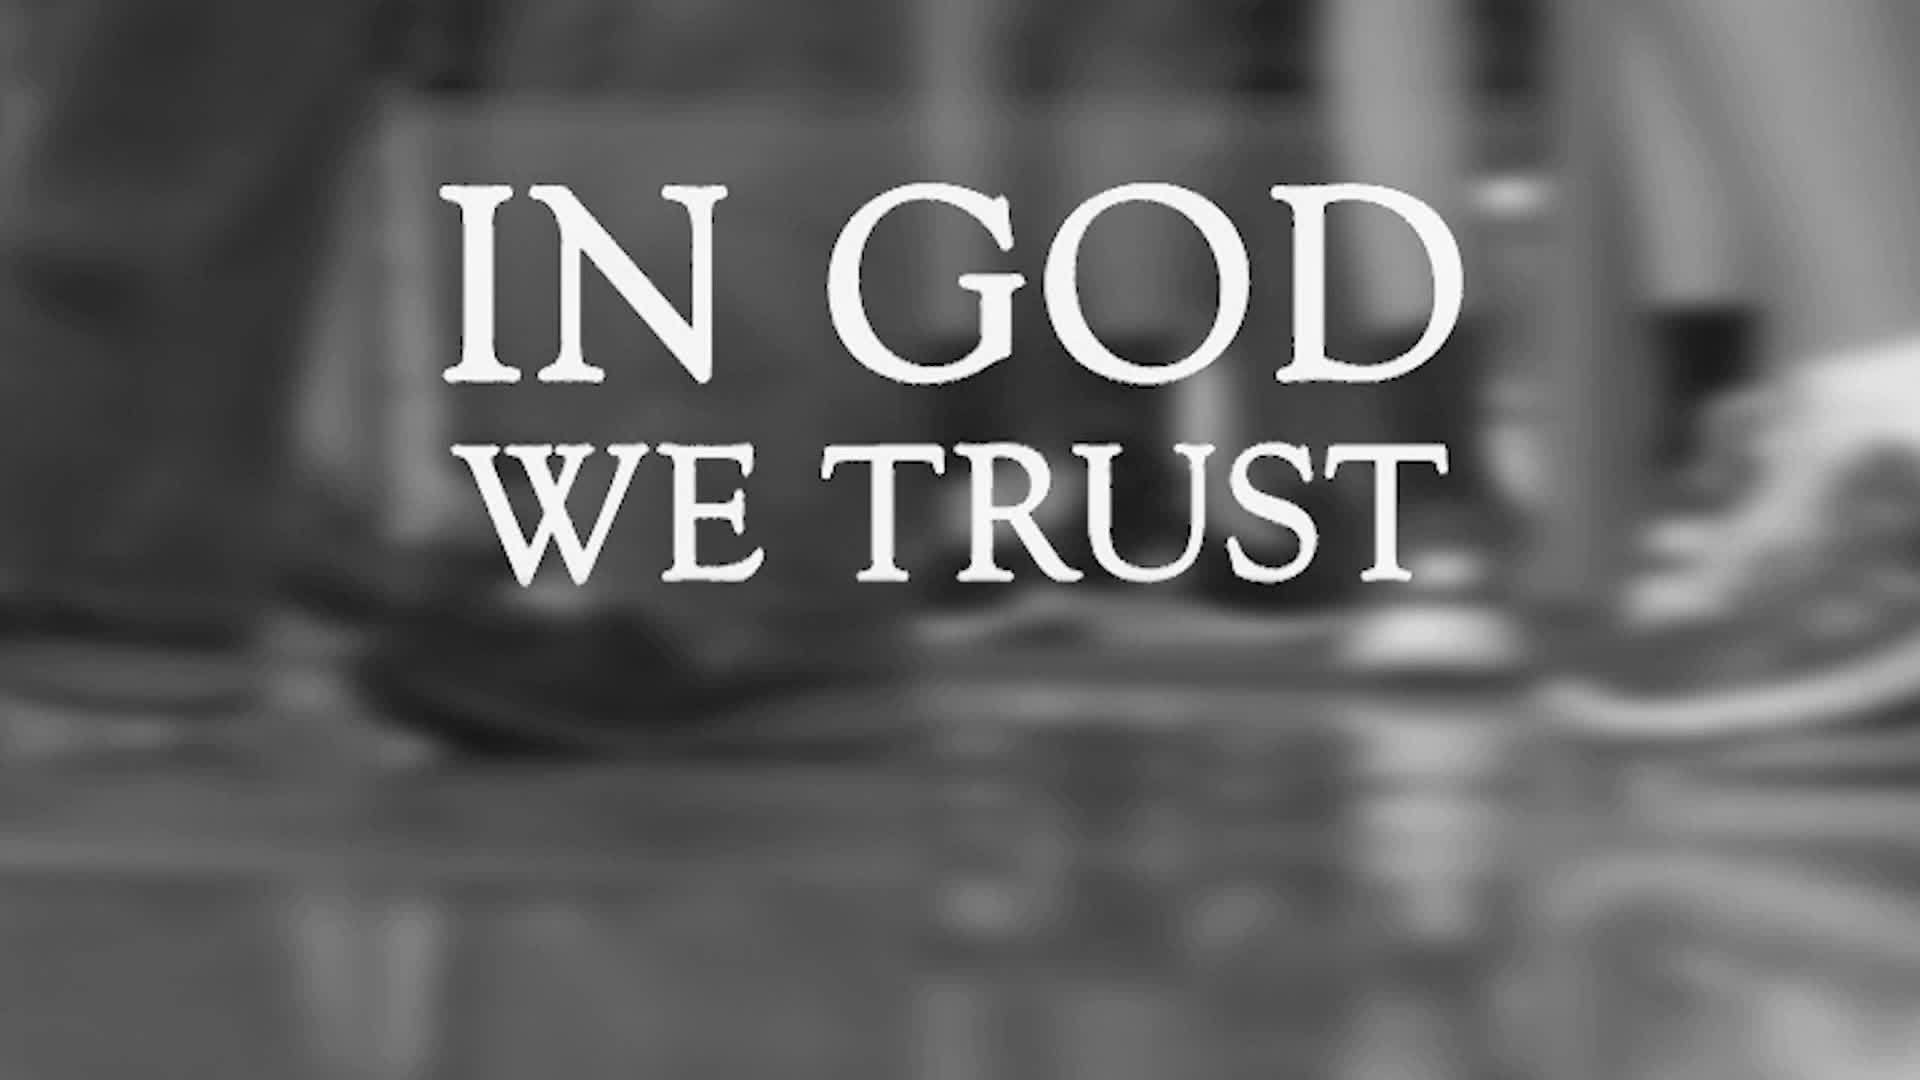 Trust in God wallpaper by CherriBlossom2248  Download on ZEDGE  dce3